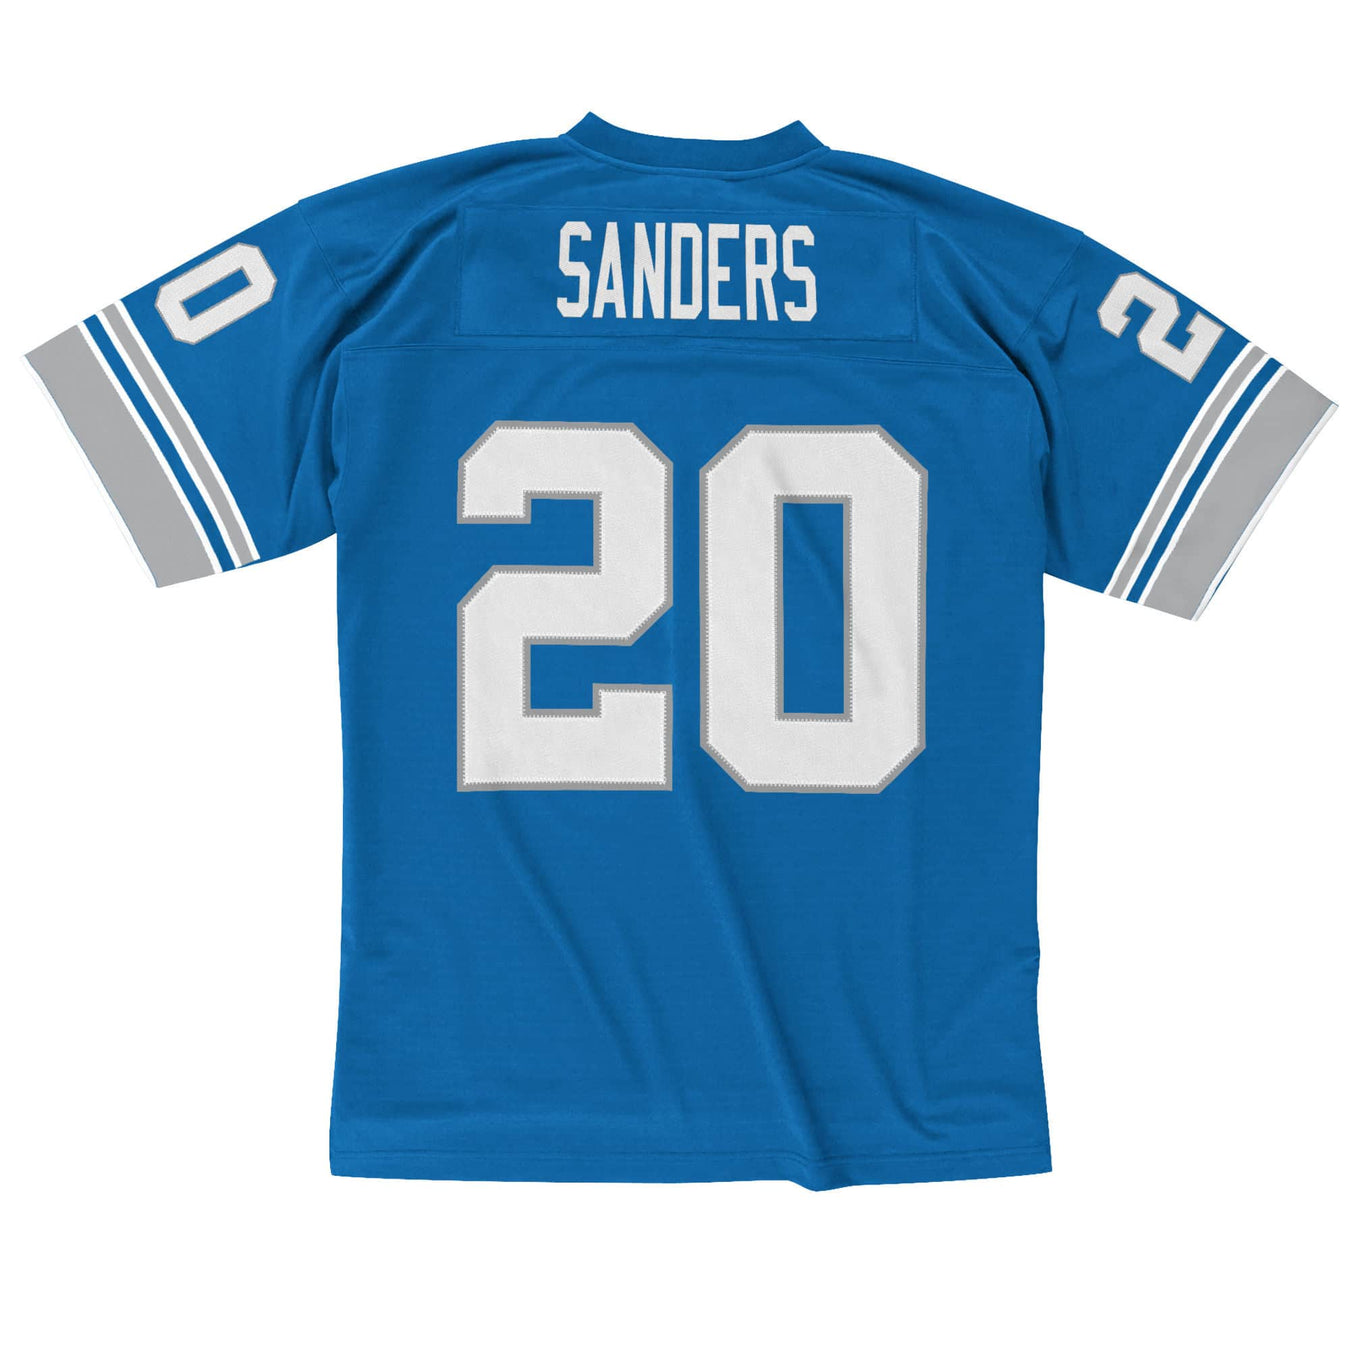 Berry Sanders NFL Jerseys, Apparel and Collectibles